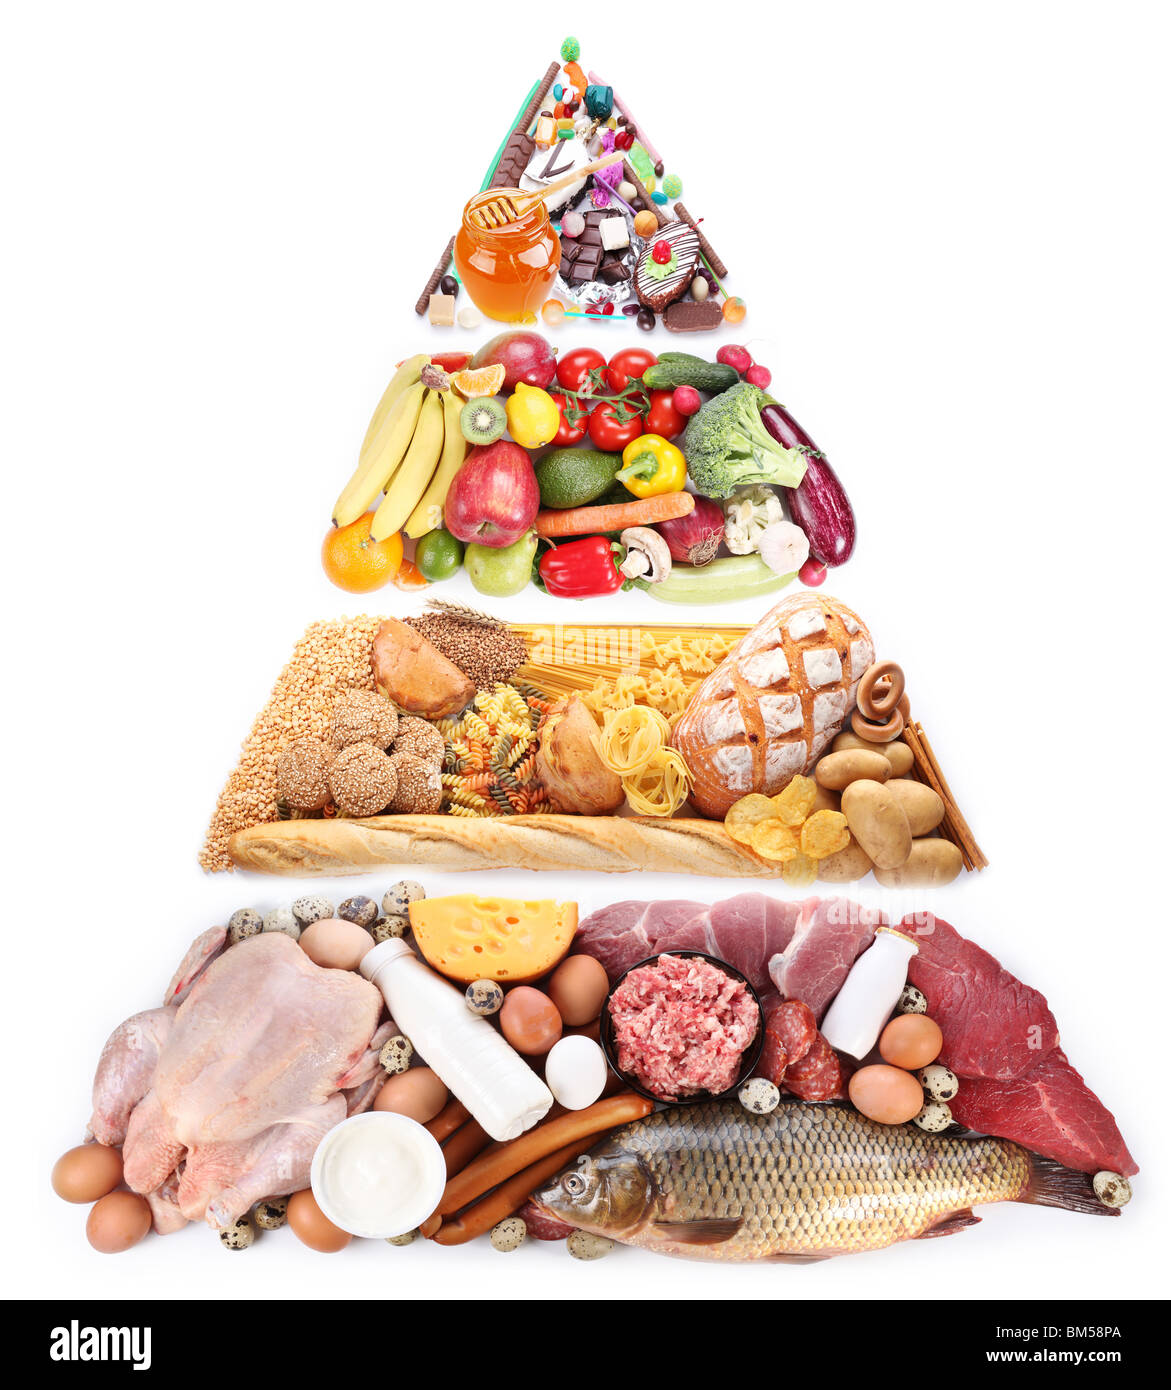 https://c8.alamy.com/comp/BM58PA/food-pyramid-for-a-balanced-diet-isolated-on-white-BM58PA.jpg